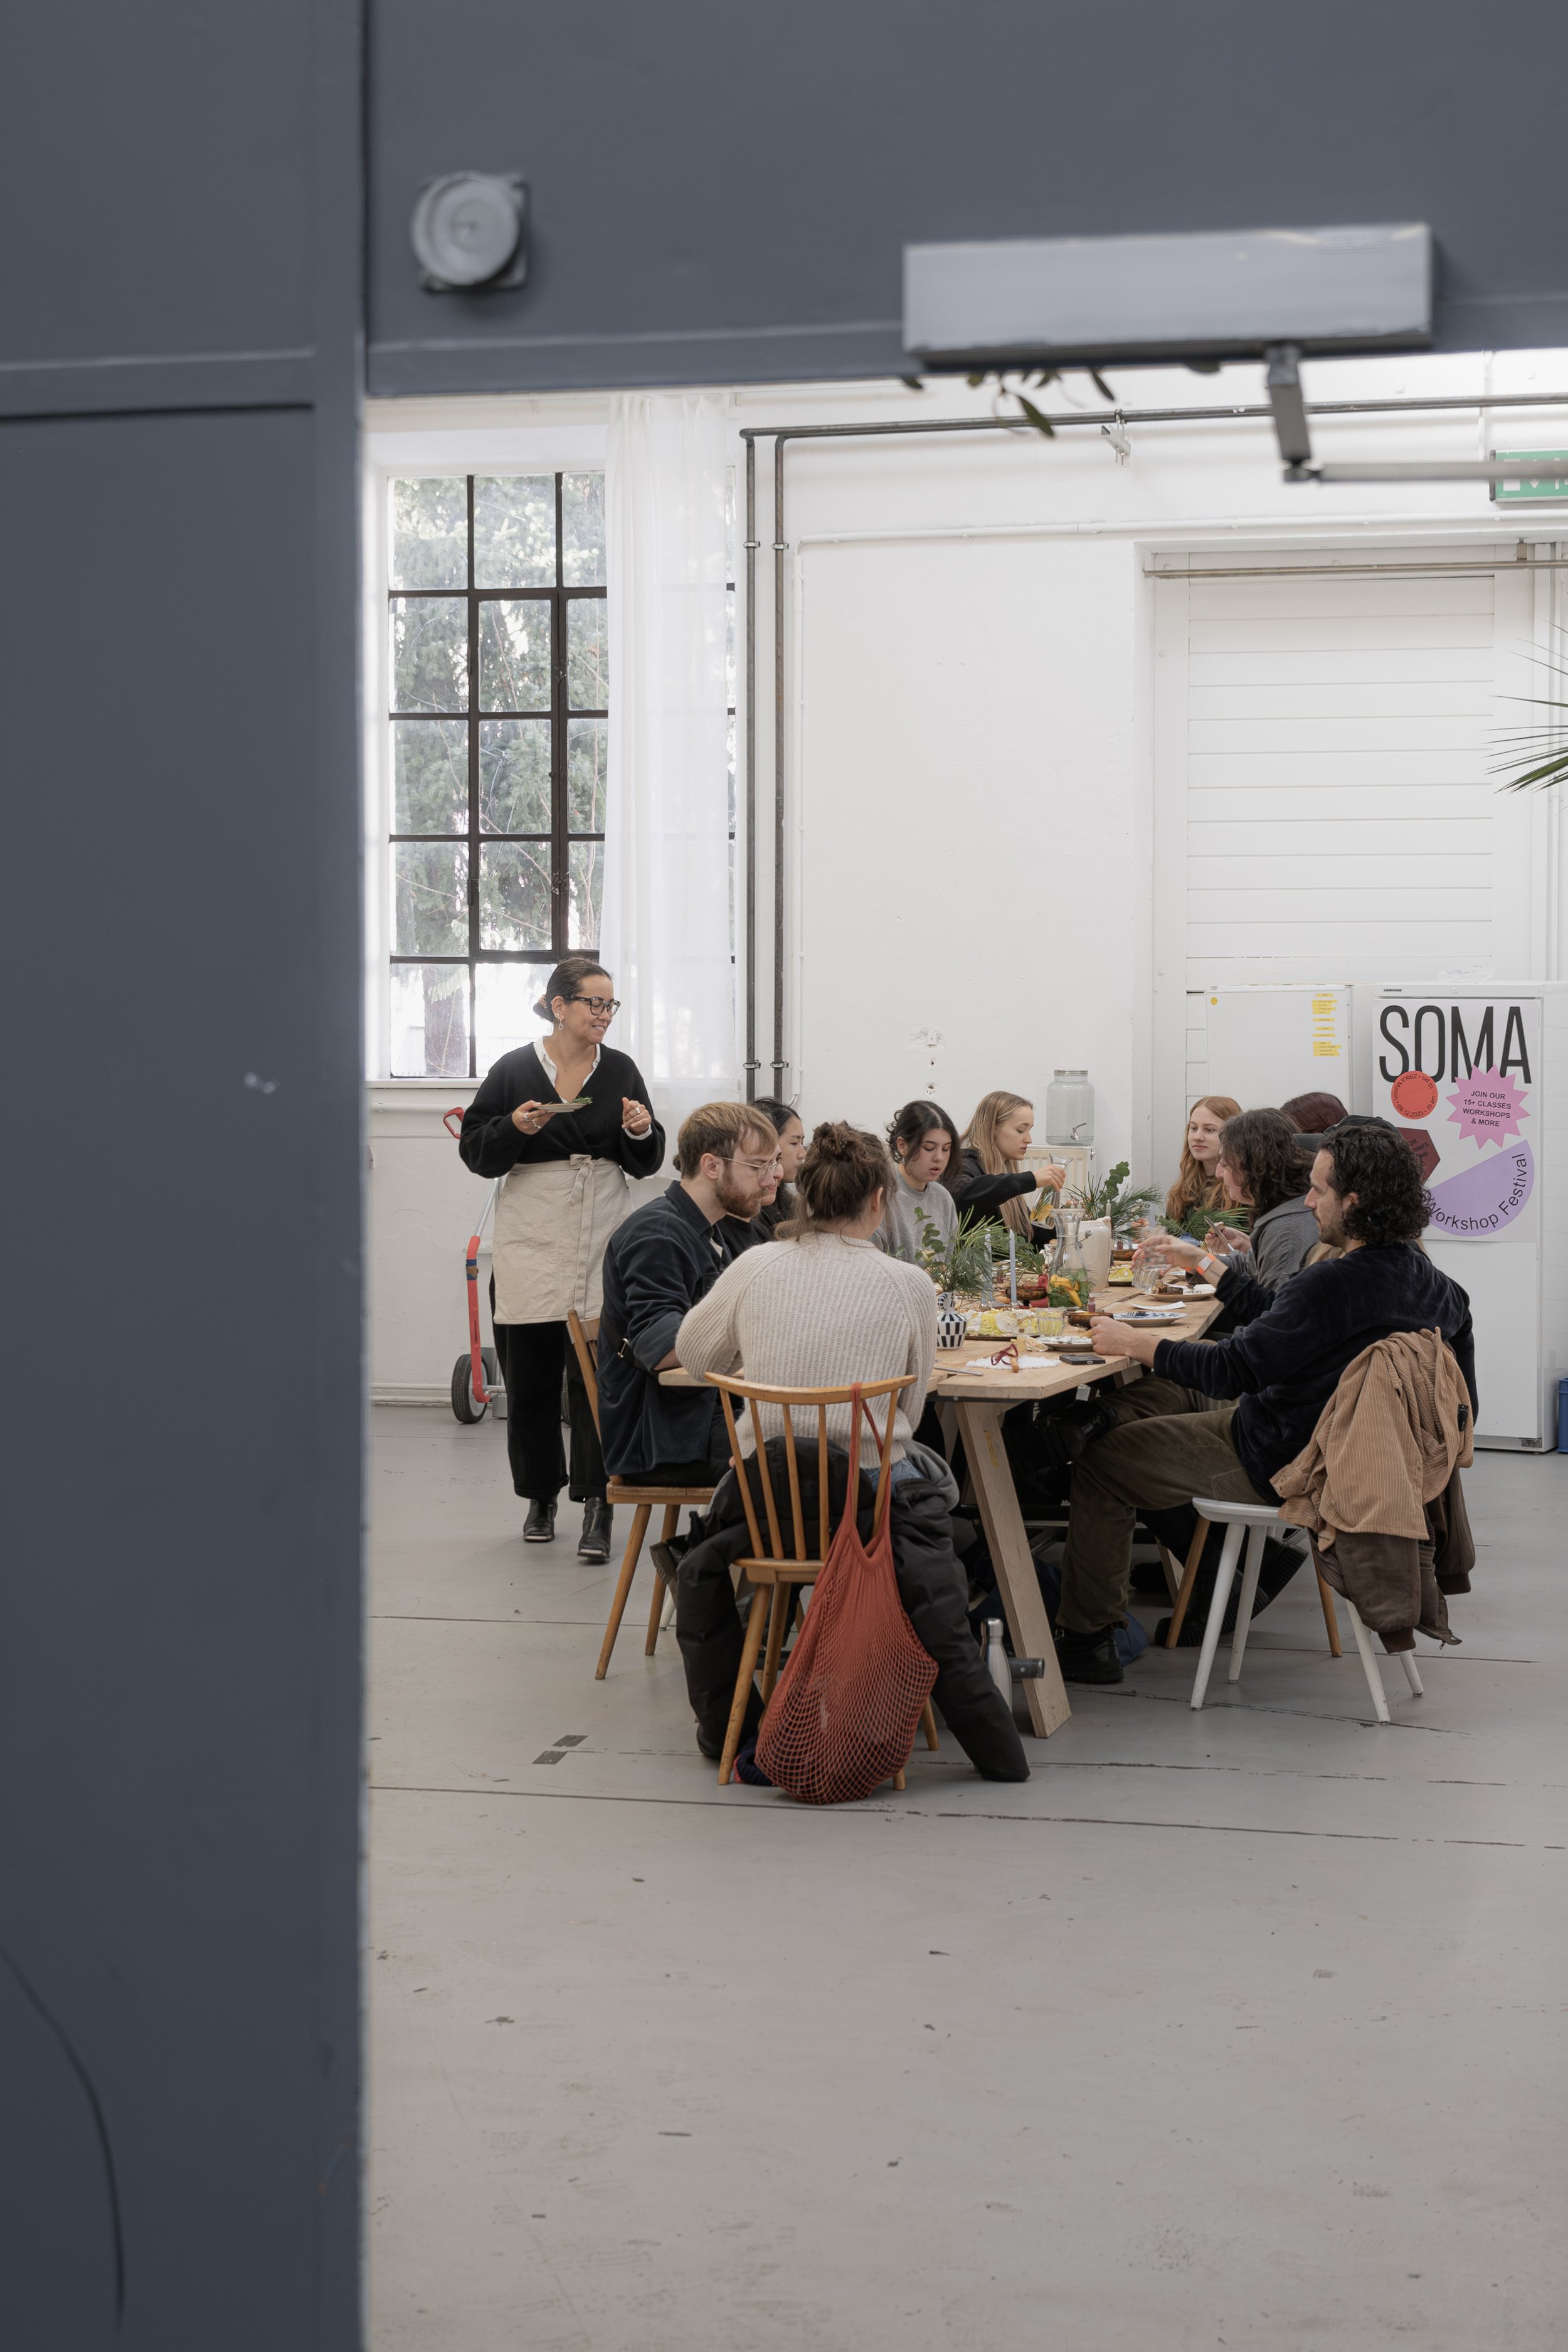 That was the SOMA Workshop Festival 2023 in Munich